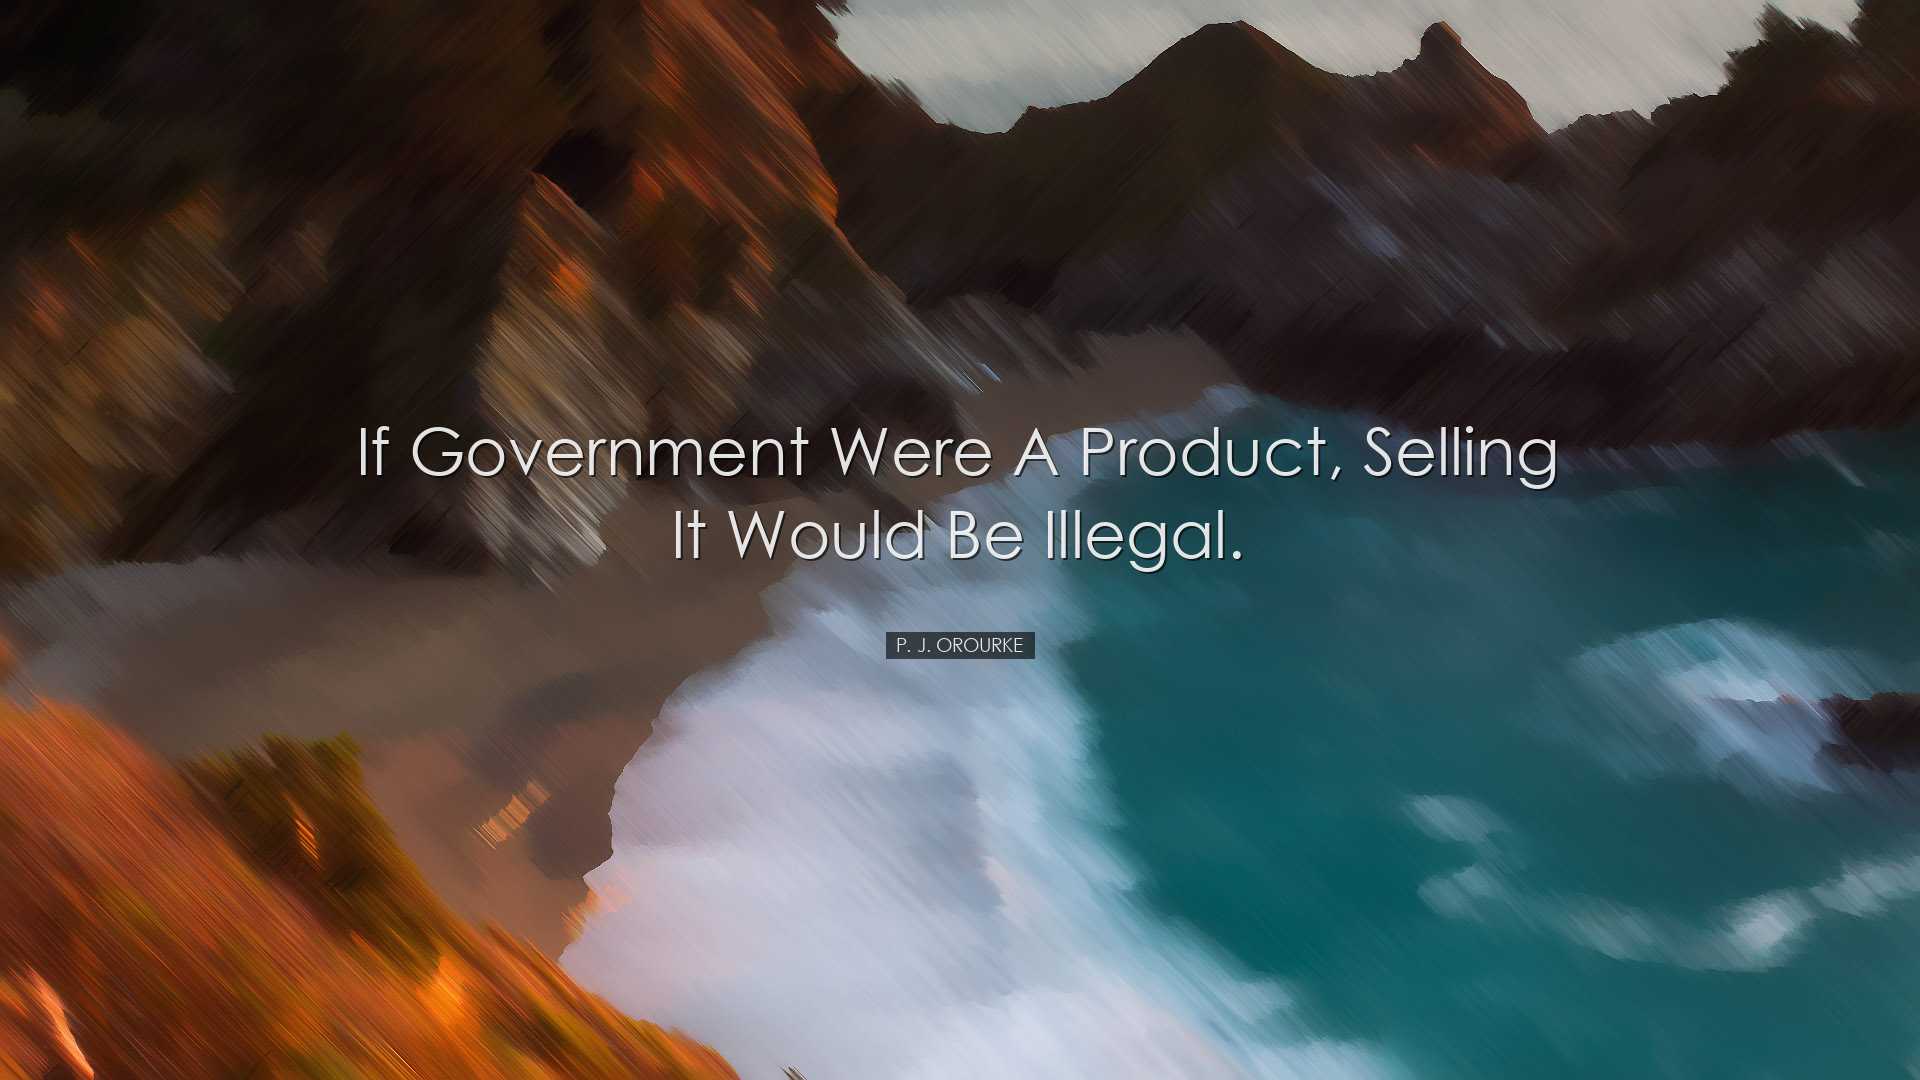 If government were a product, selling it would be illegal. - P. J.